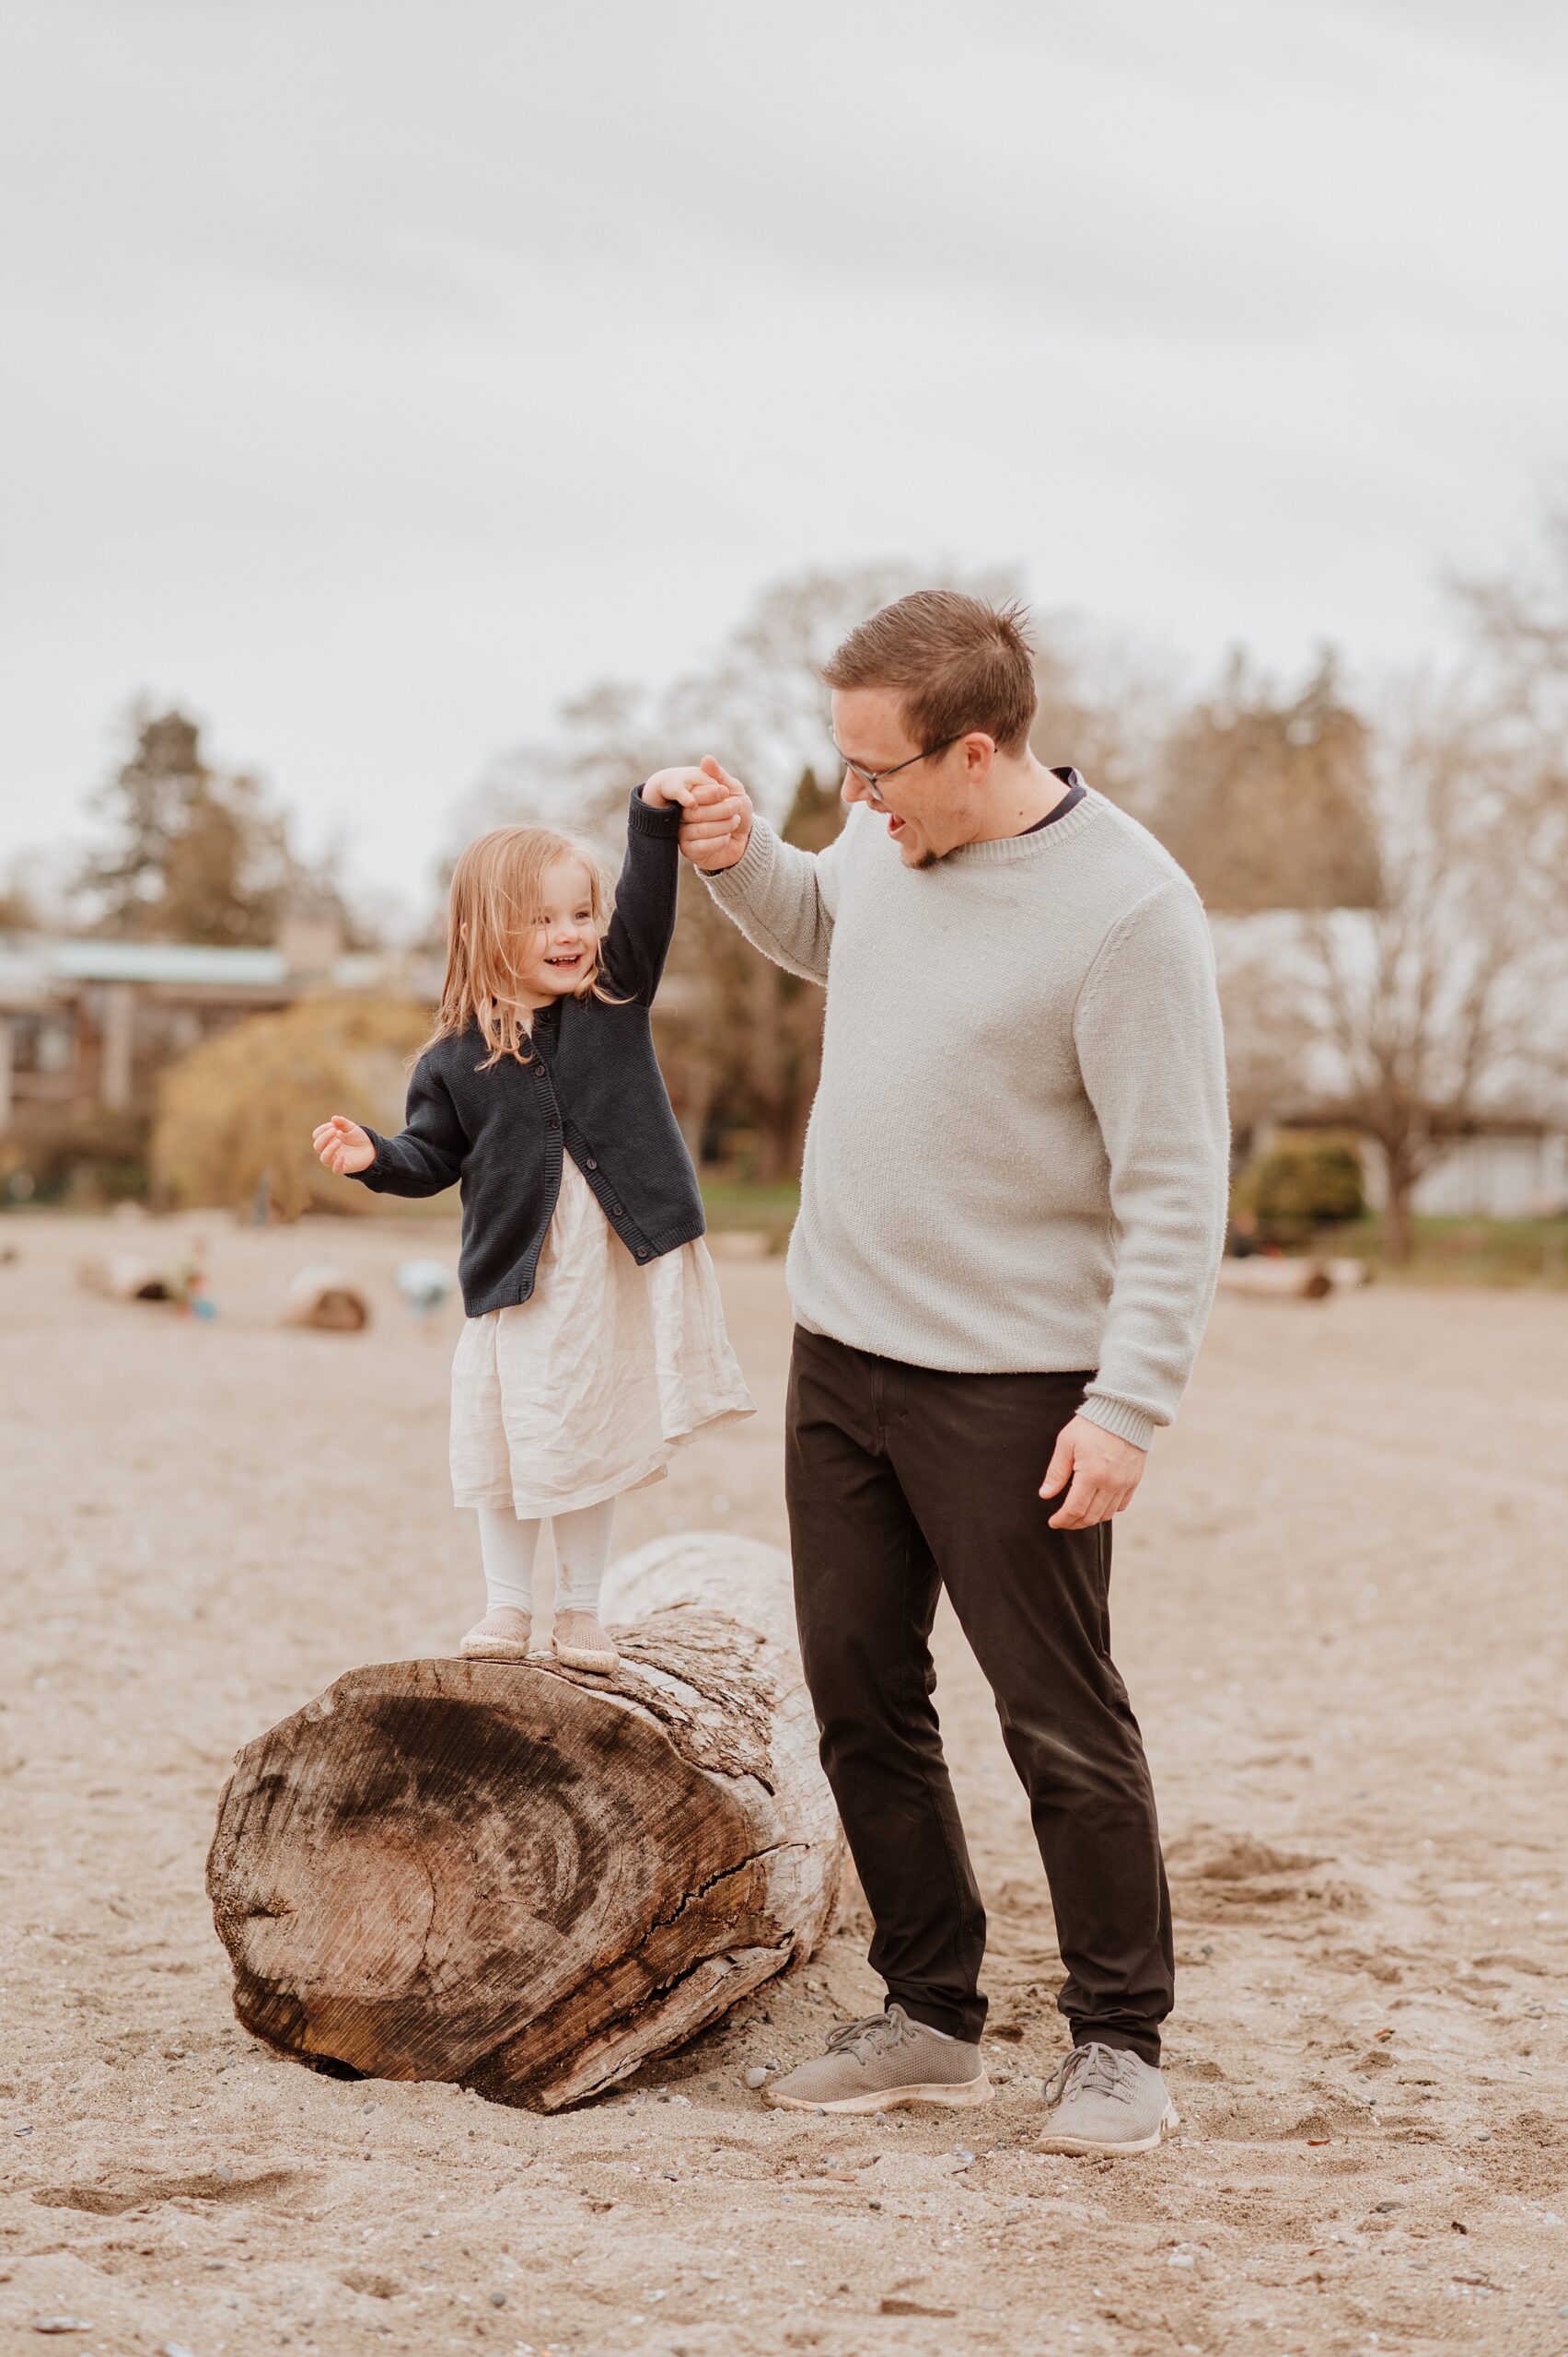 A father plays with his toddler daughter on a piece of beach driftwood in sweaters